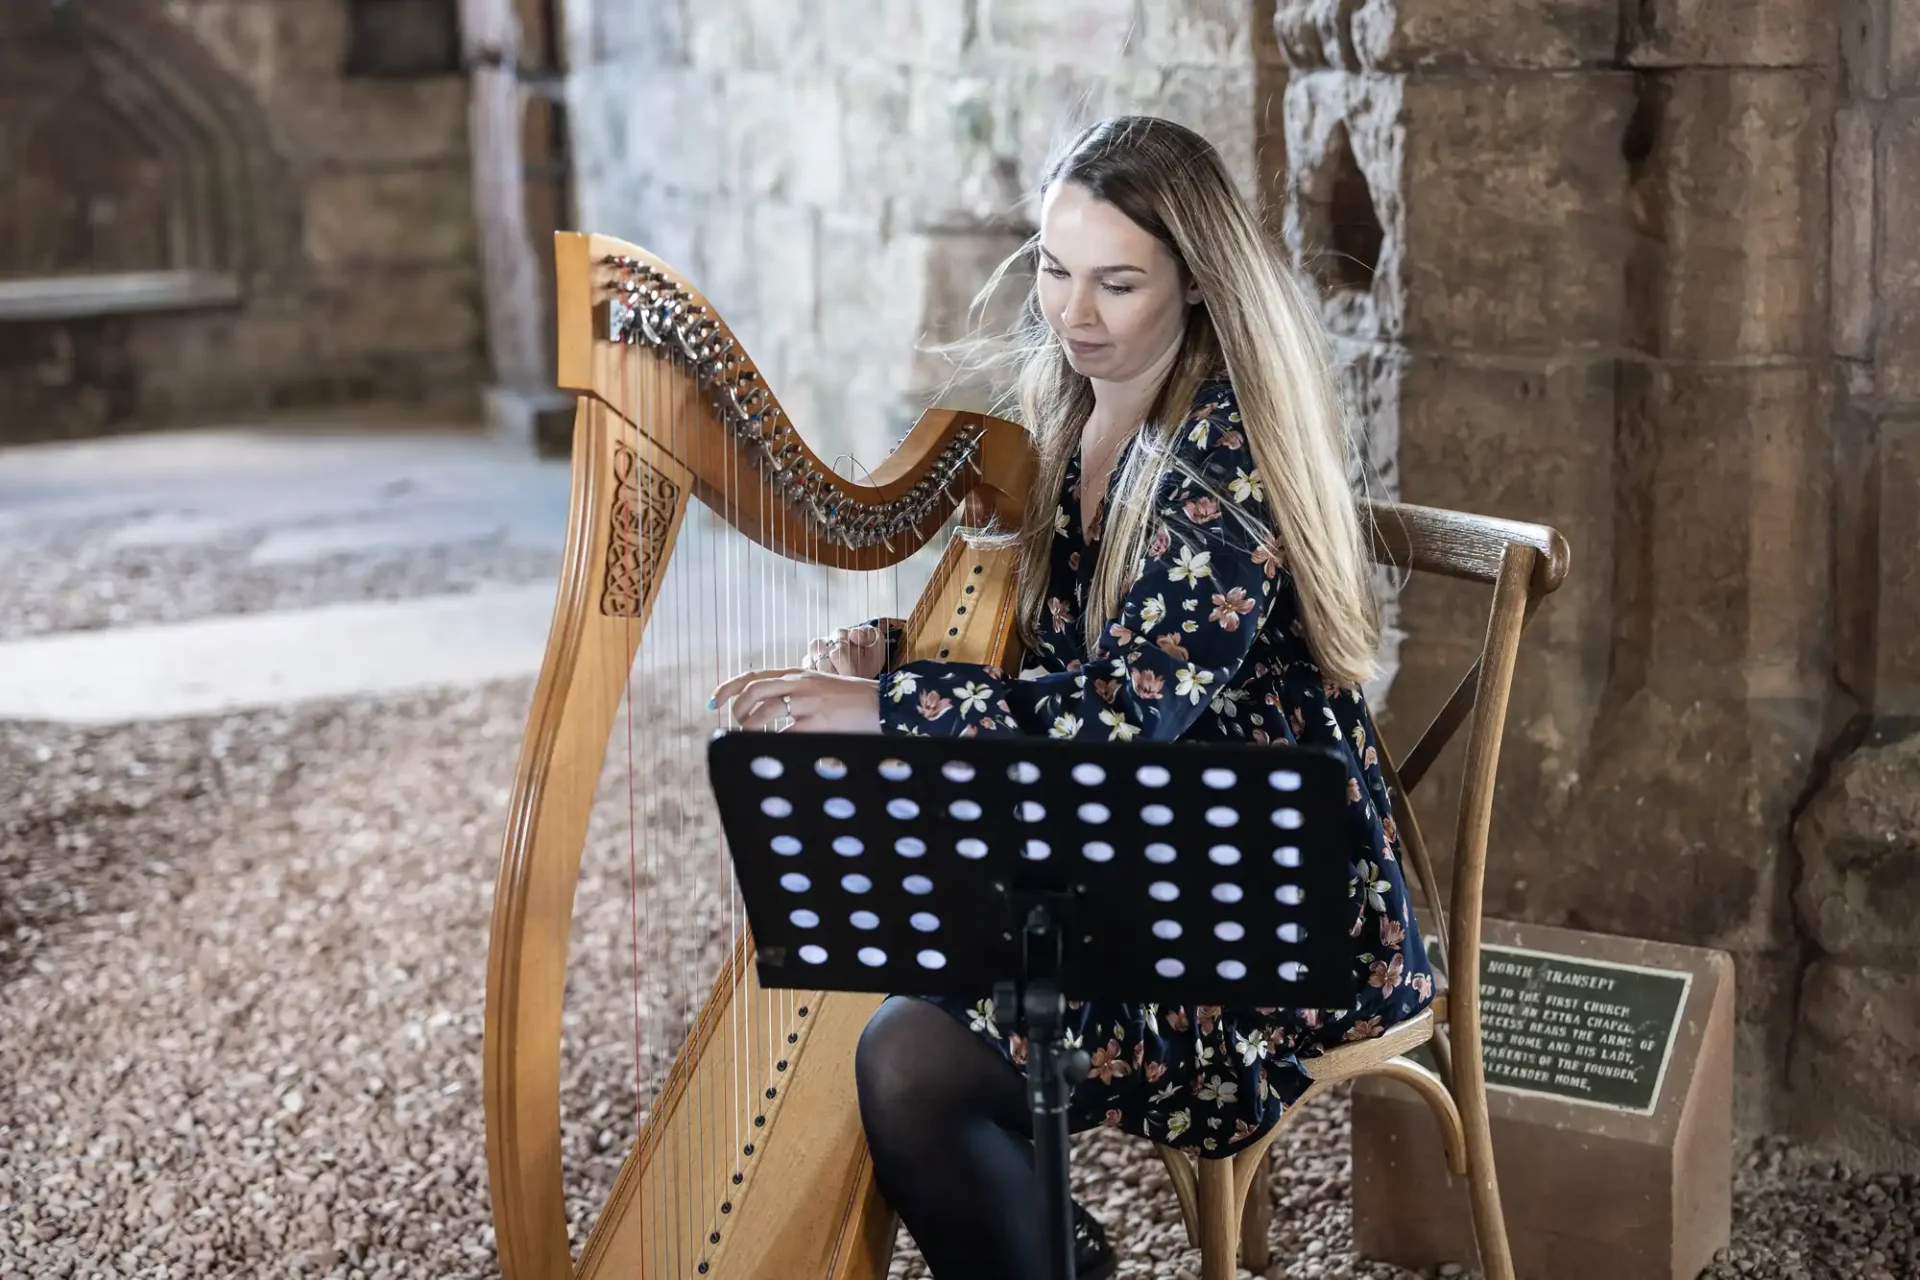 A woman plays a harp inside a historic stone building, focused on sheet music on a black stand.